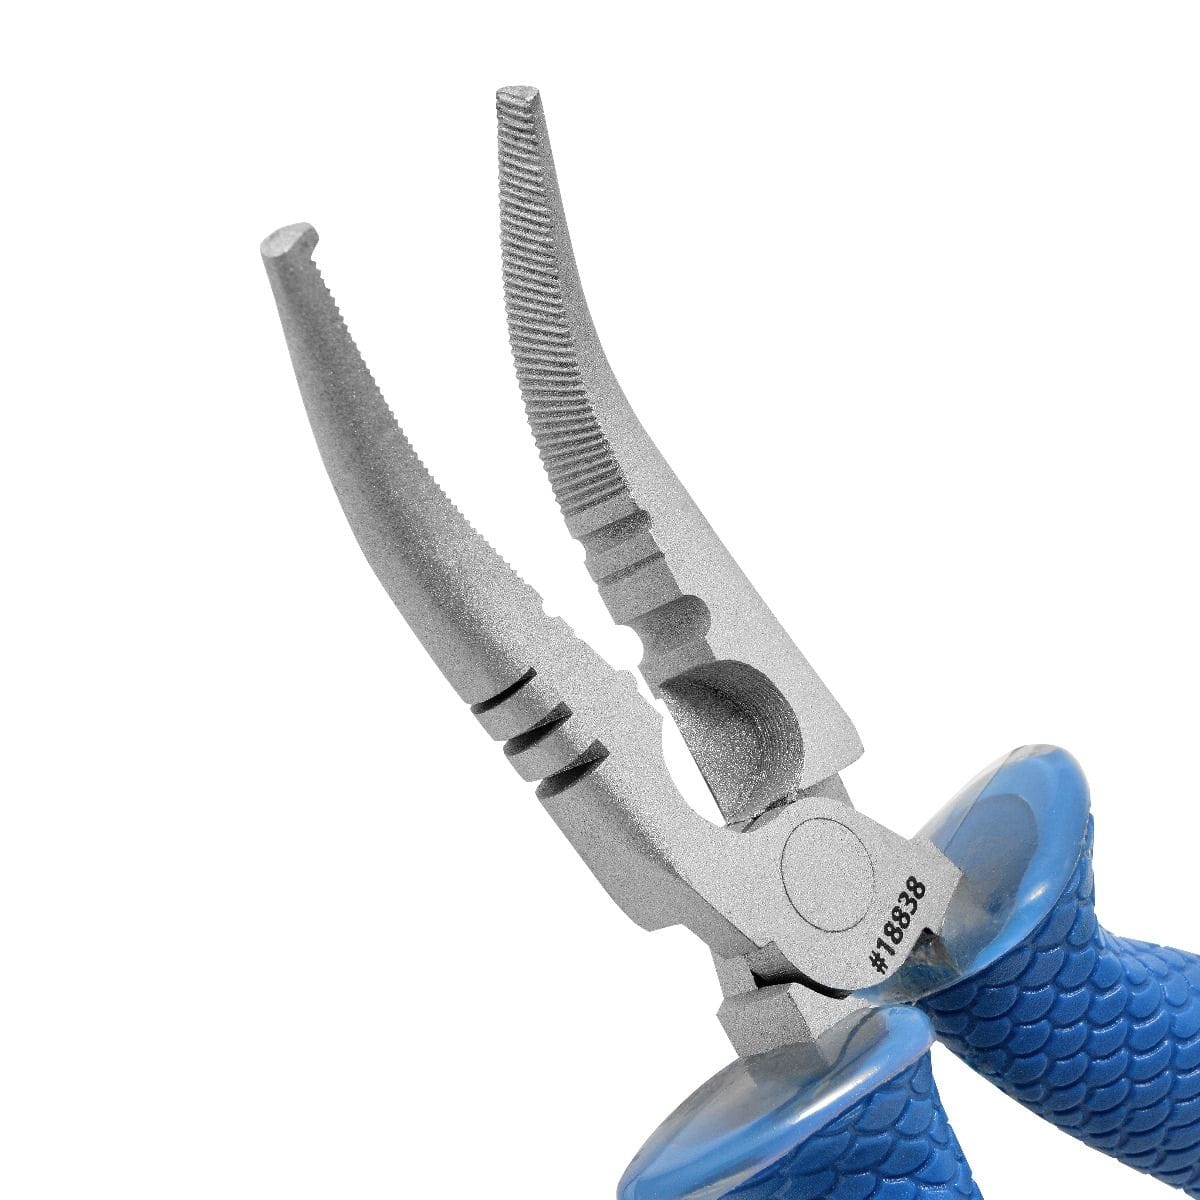 Plaztek Cuda 7" bent nose split ring plier are 3 x harder then steel making ideal tool for heavy use.